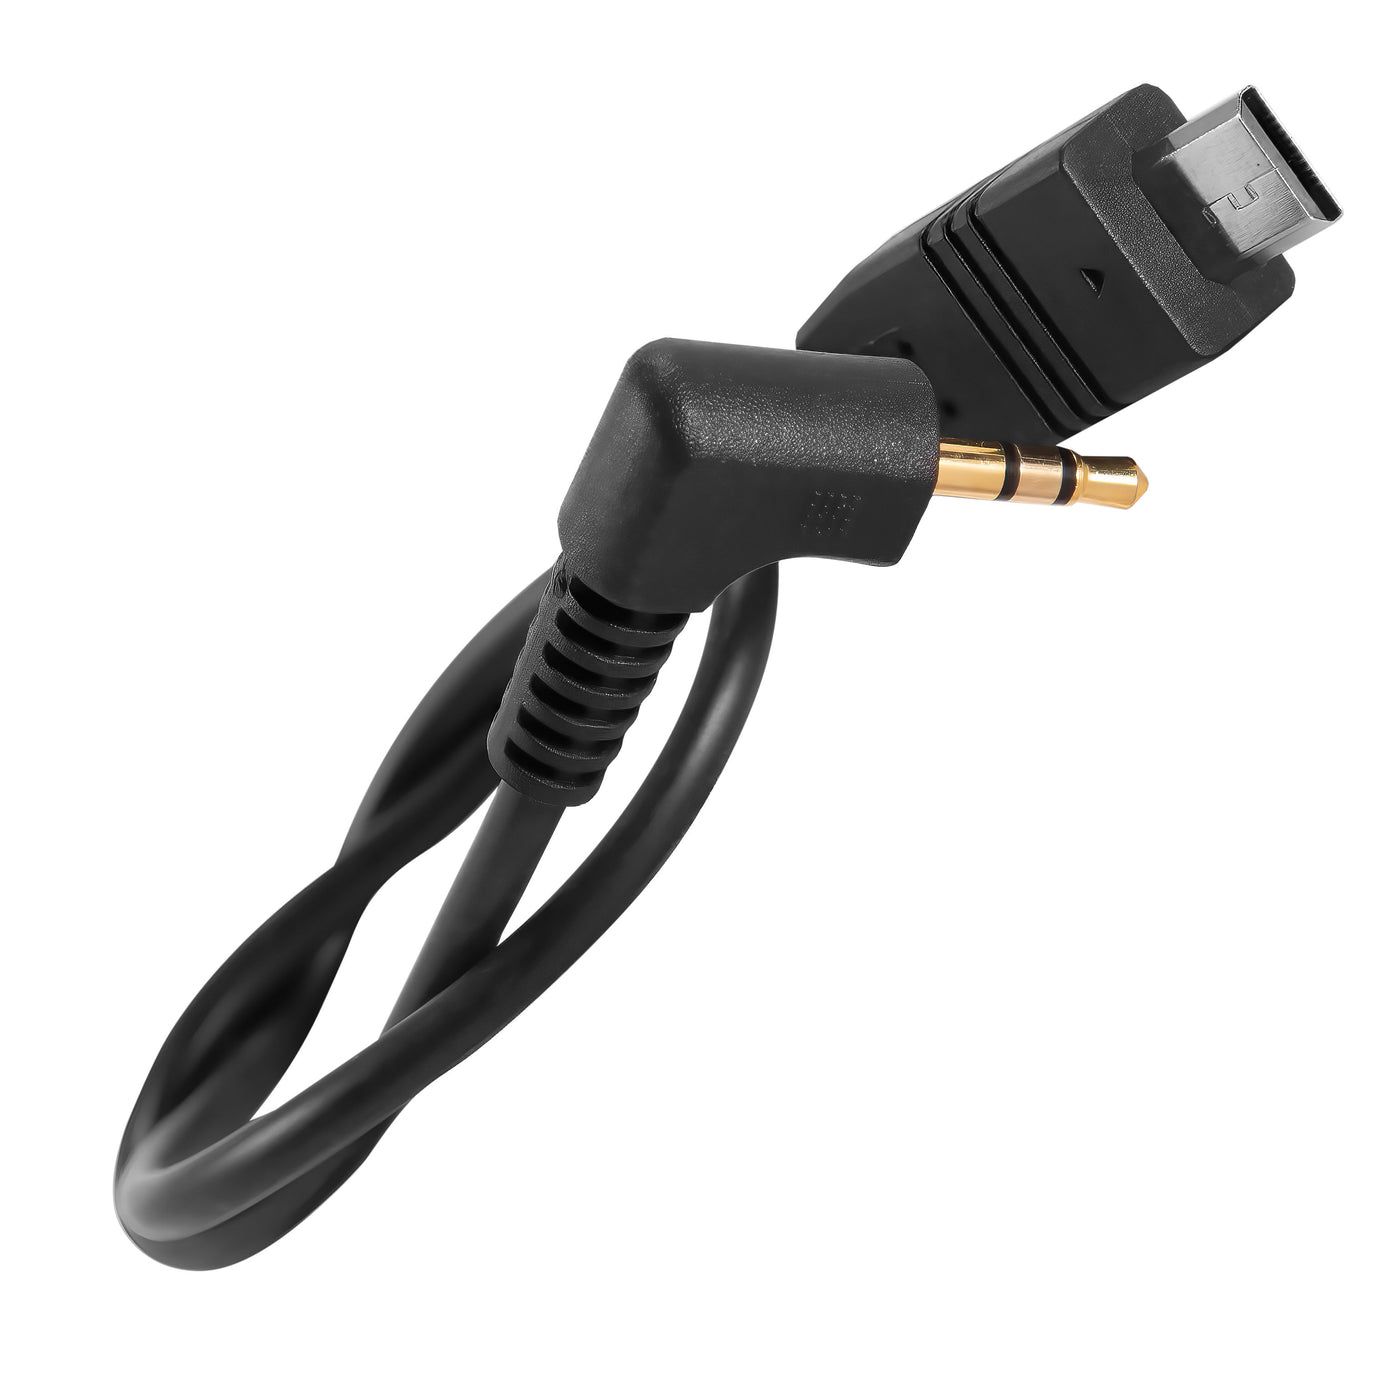 2.5mm to Micro USB Sony VPR1 LANC Remote Trigger Shutter Cable